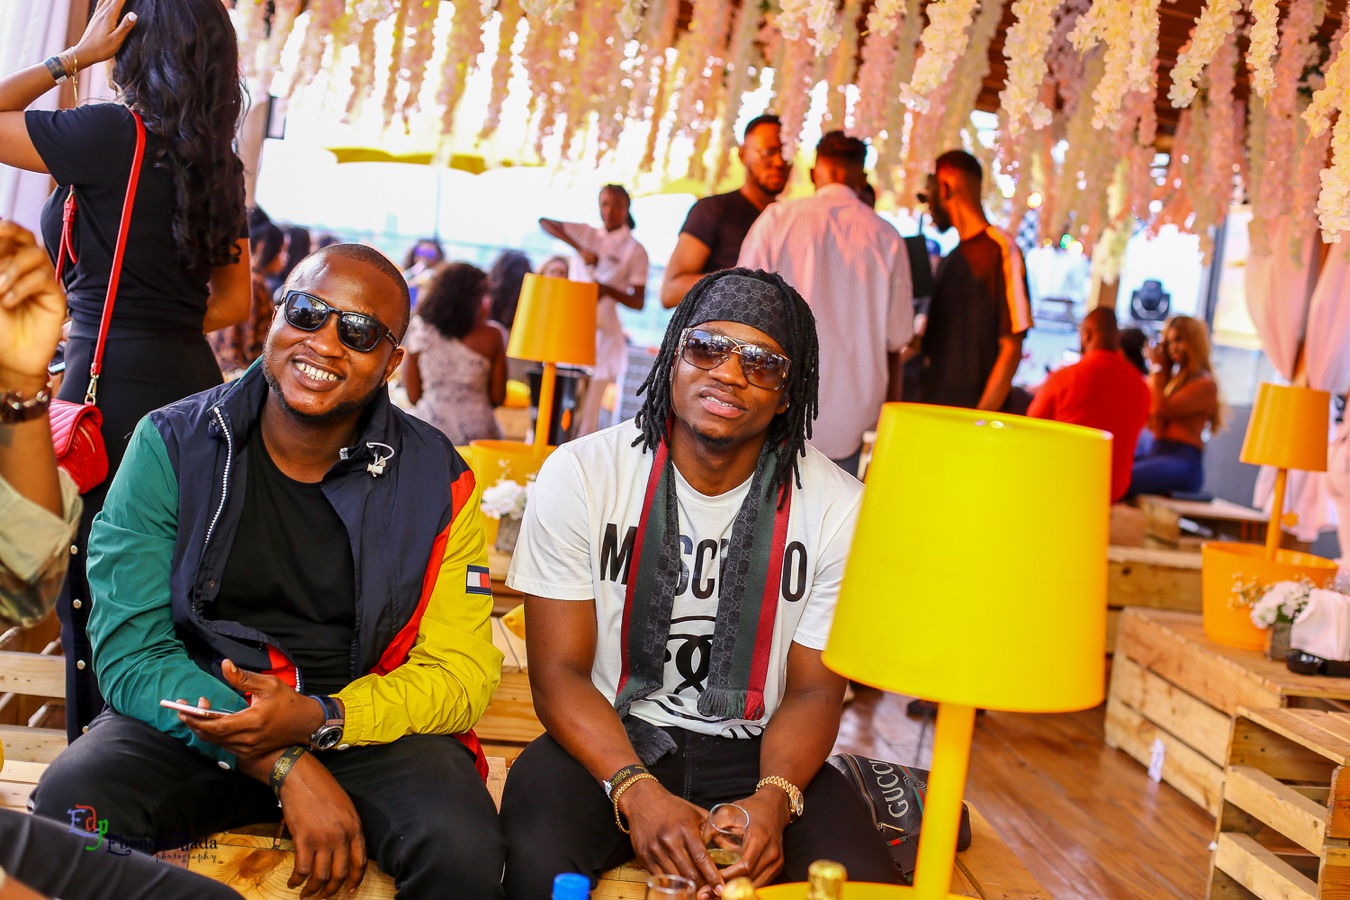 The Funky Brunch Lagos Vol 2 Was LIT – Here’s Proof!